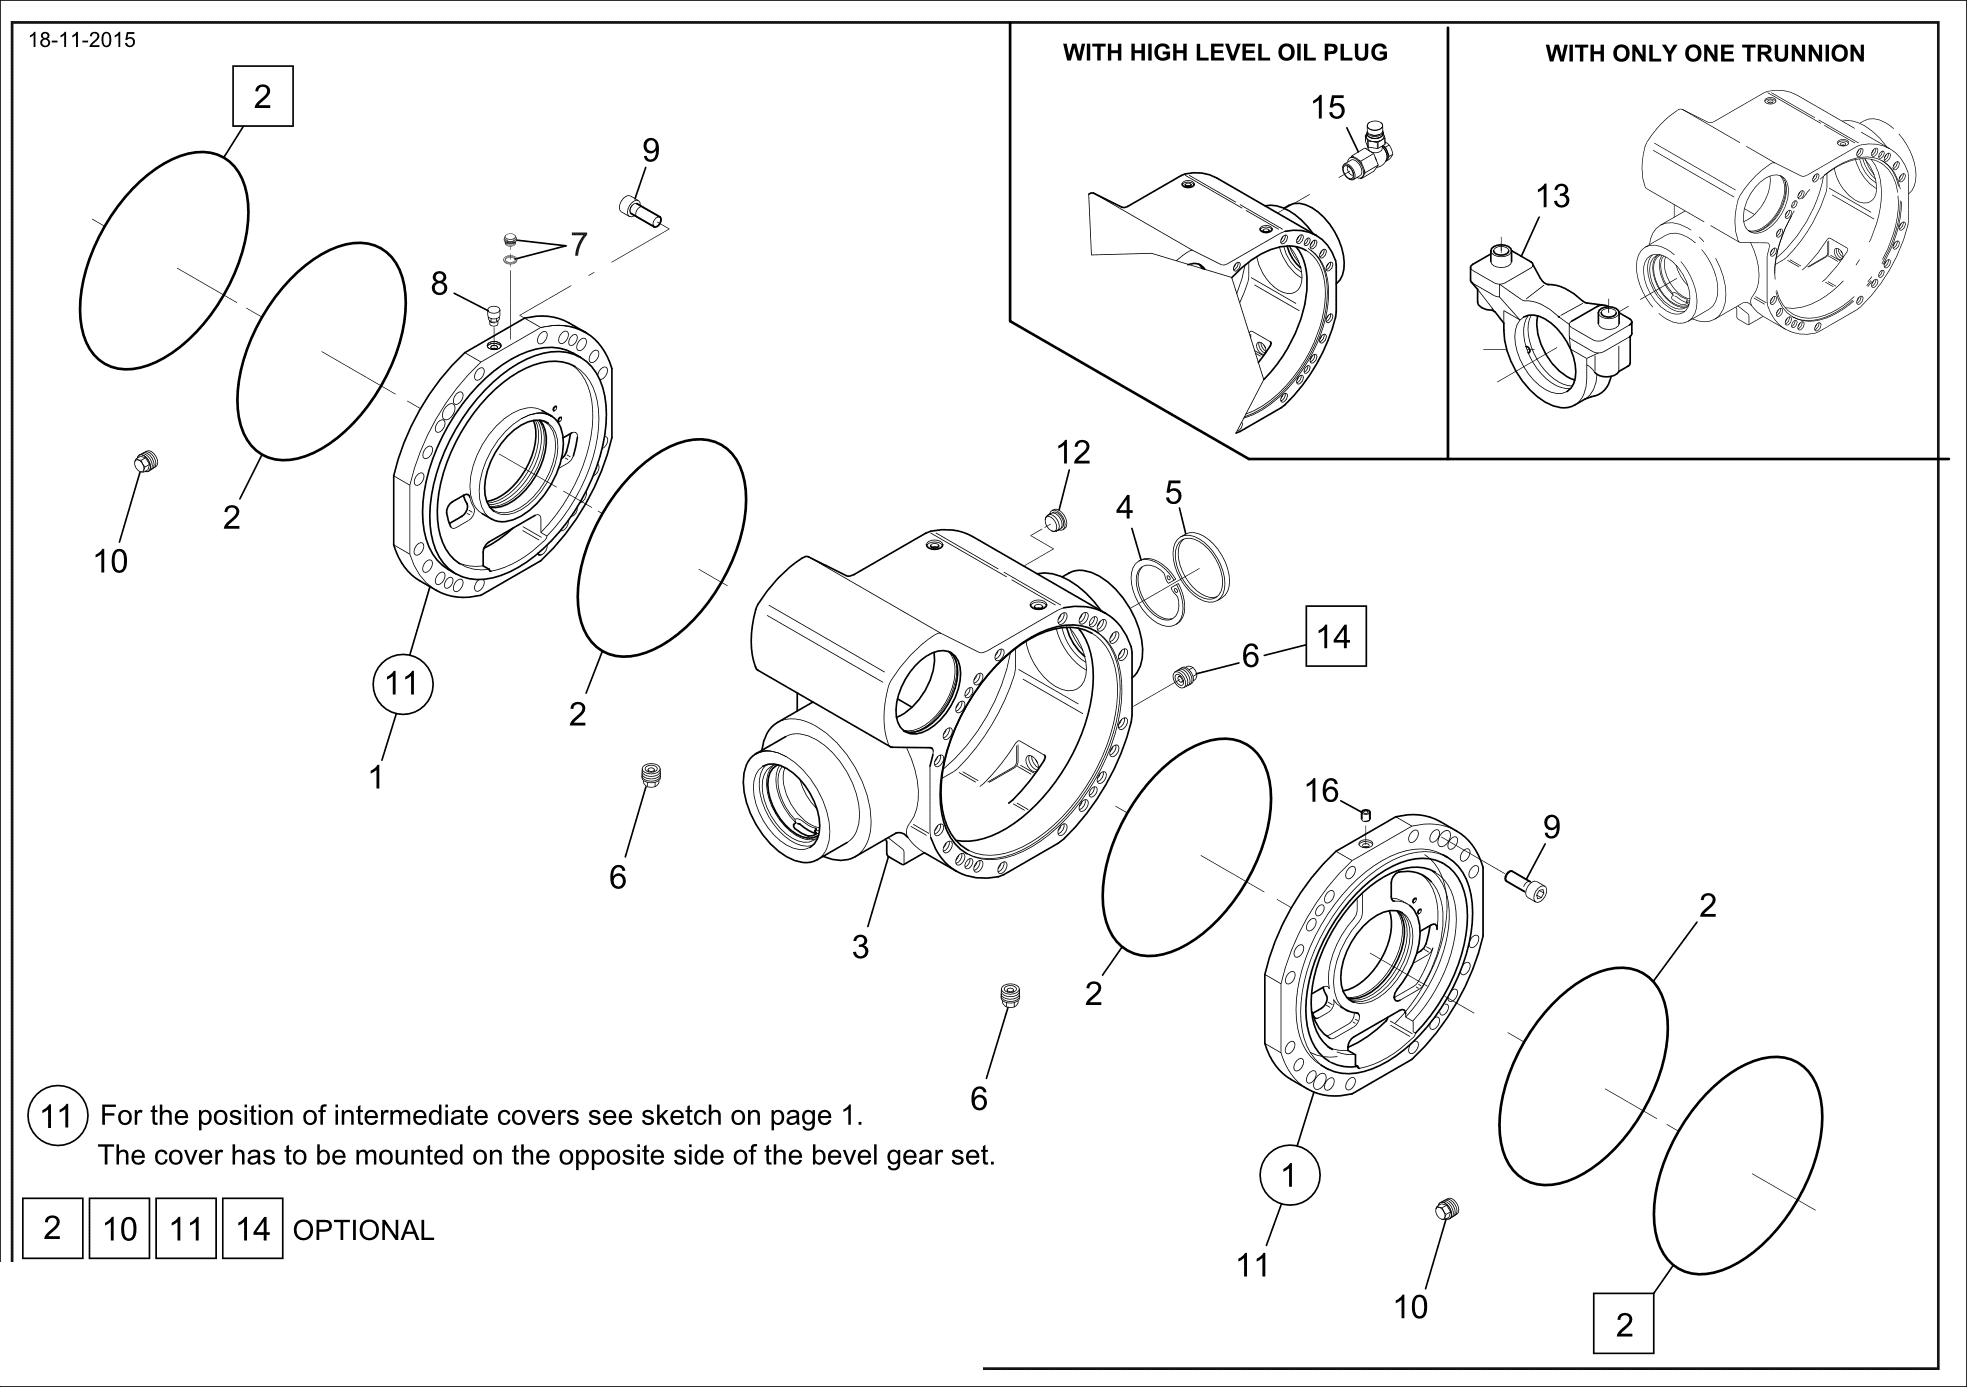 drawing for WEILER 6563 - VENT (figure 4)